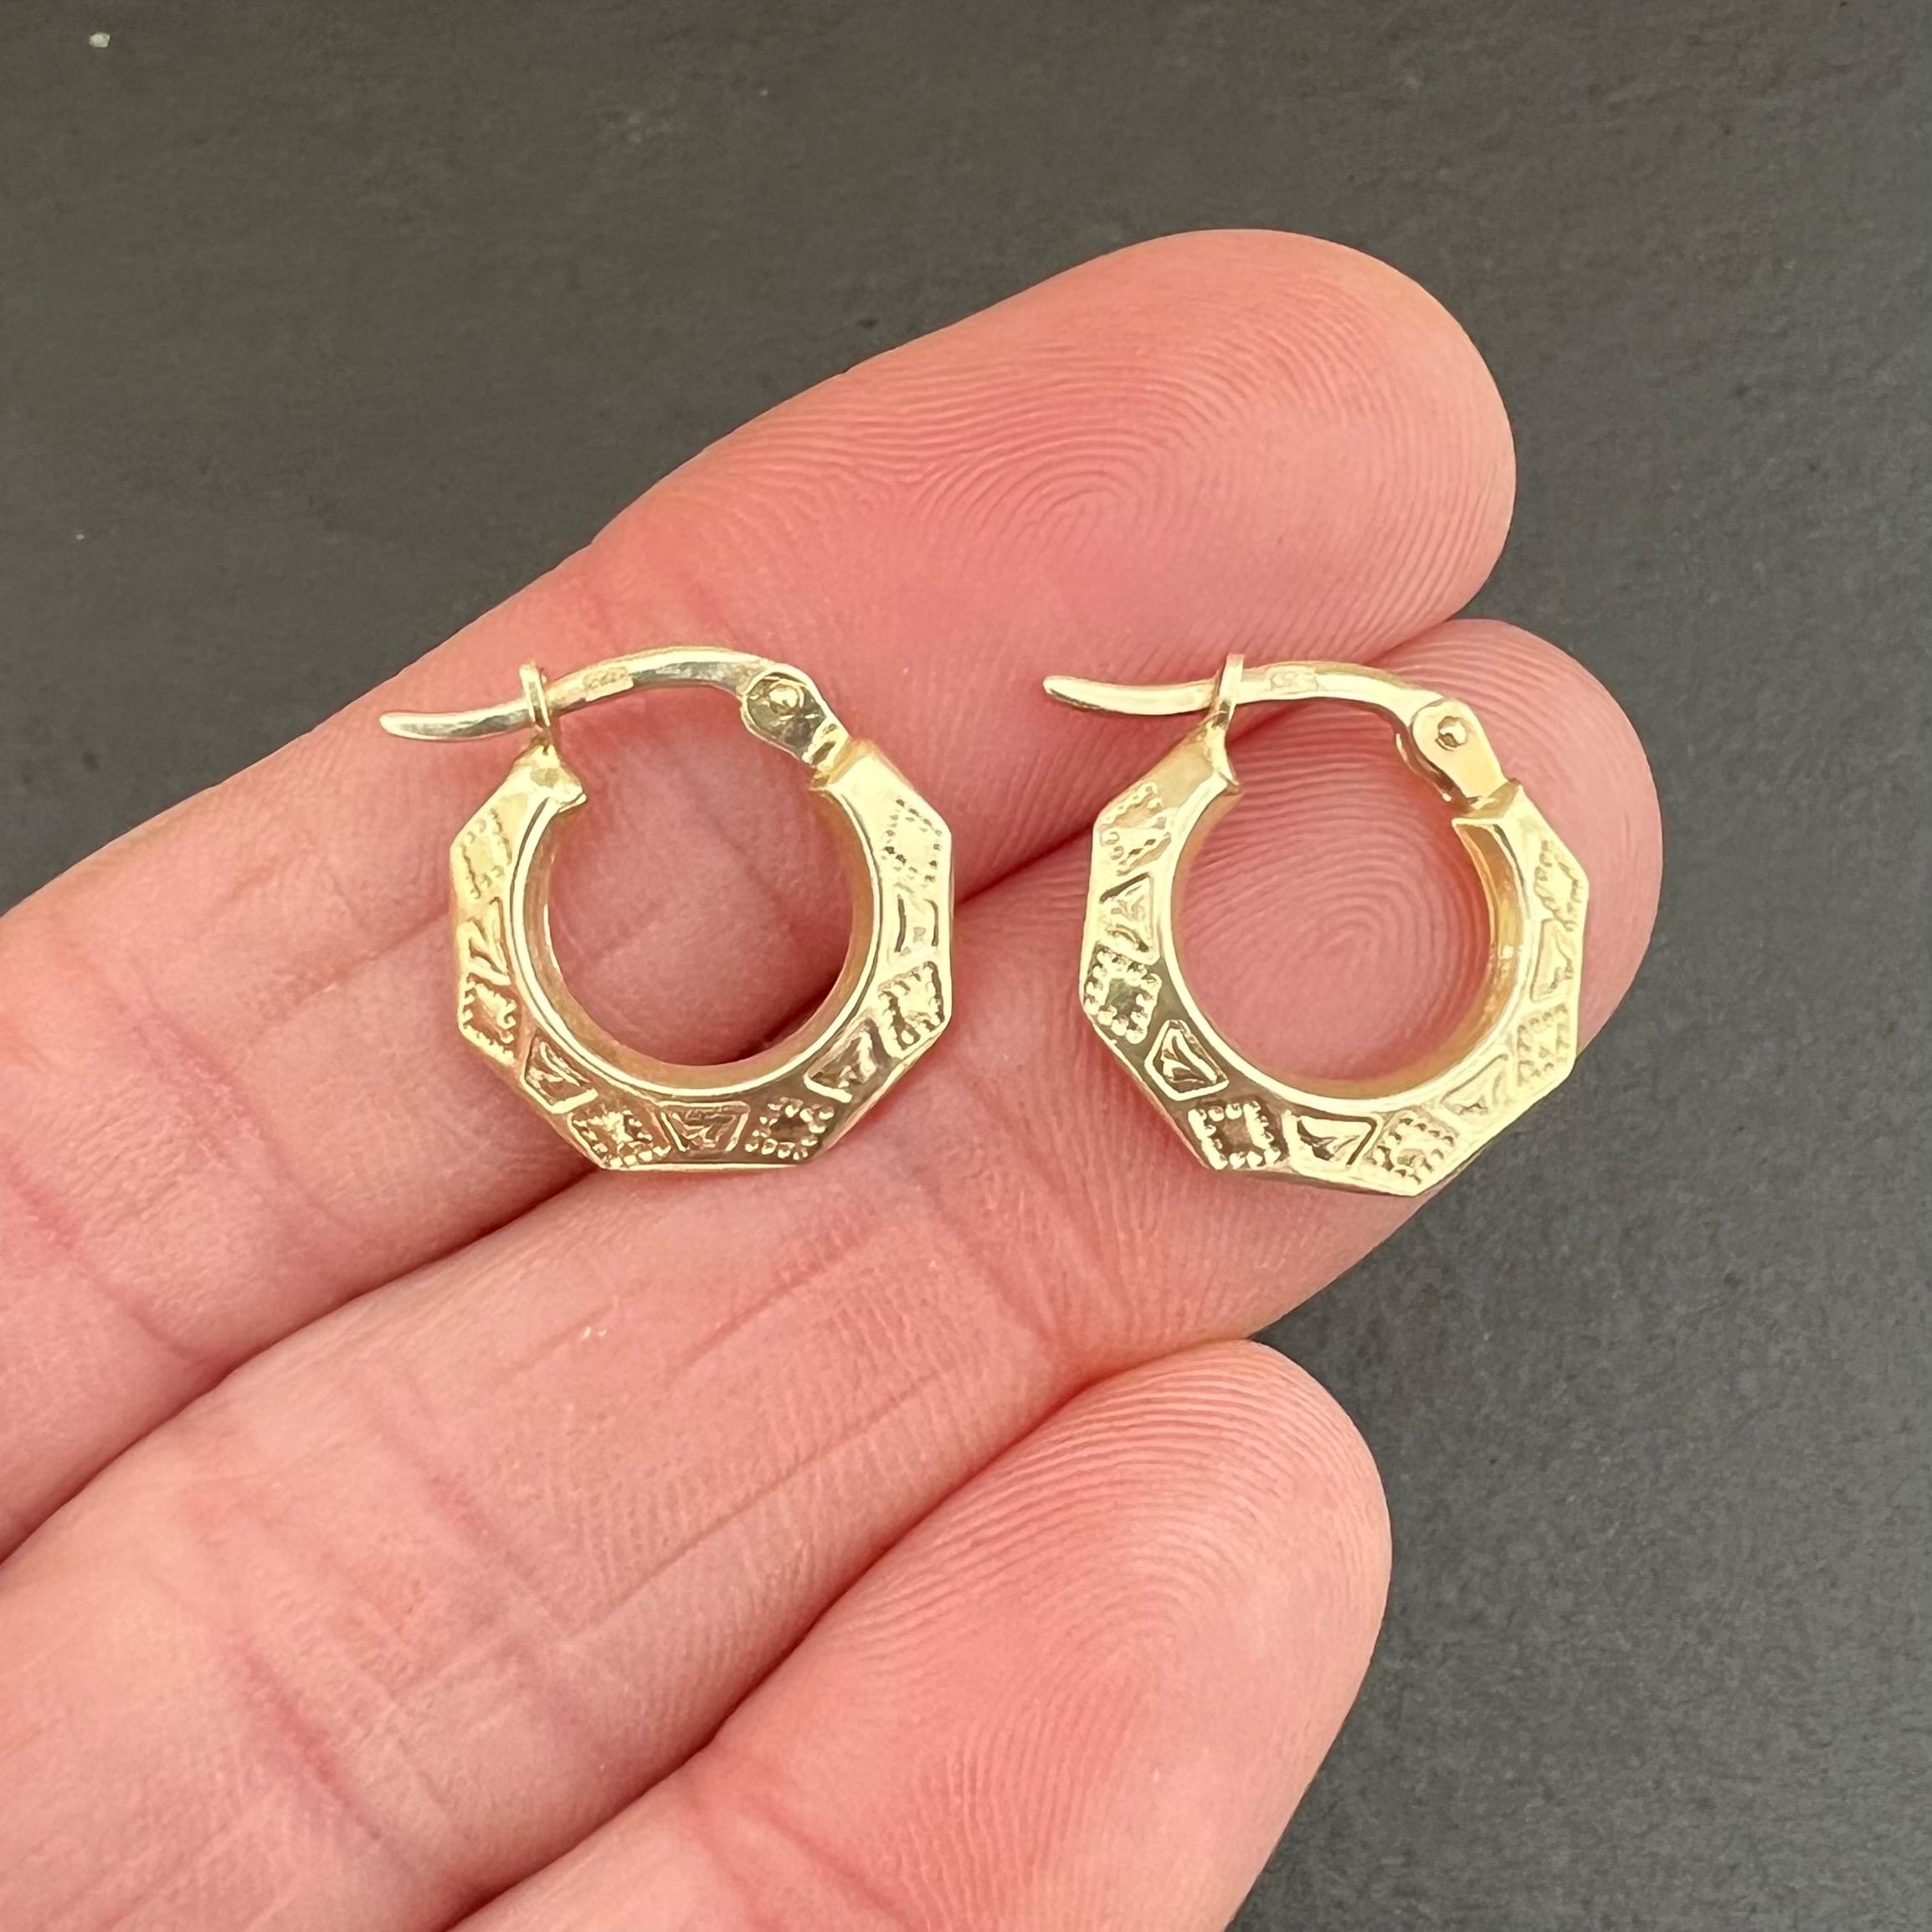 A pair of vintage hoop earrings made of 14 karat yellow gold. The rounded hoops feature an engraved design that works around the piece. Hallmarks are present and visible at the hooks.

They are a great size (15 mm diameter) and super lightweight